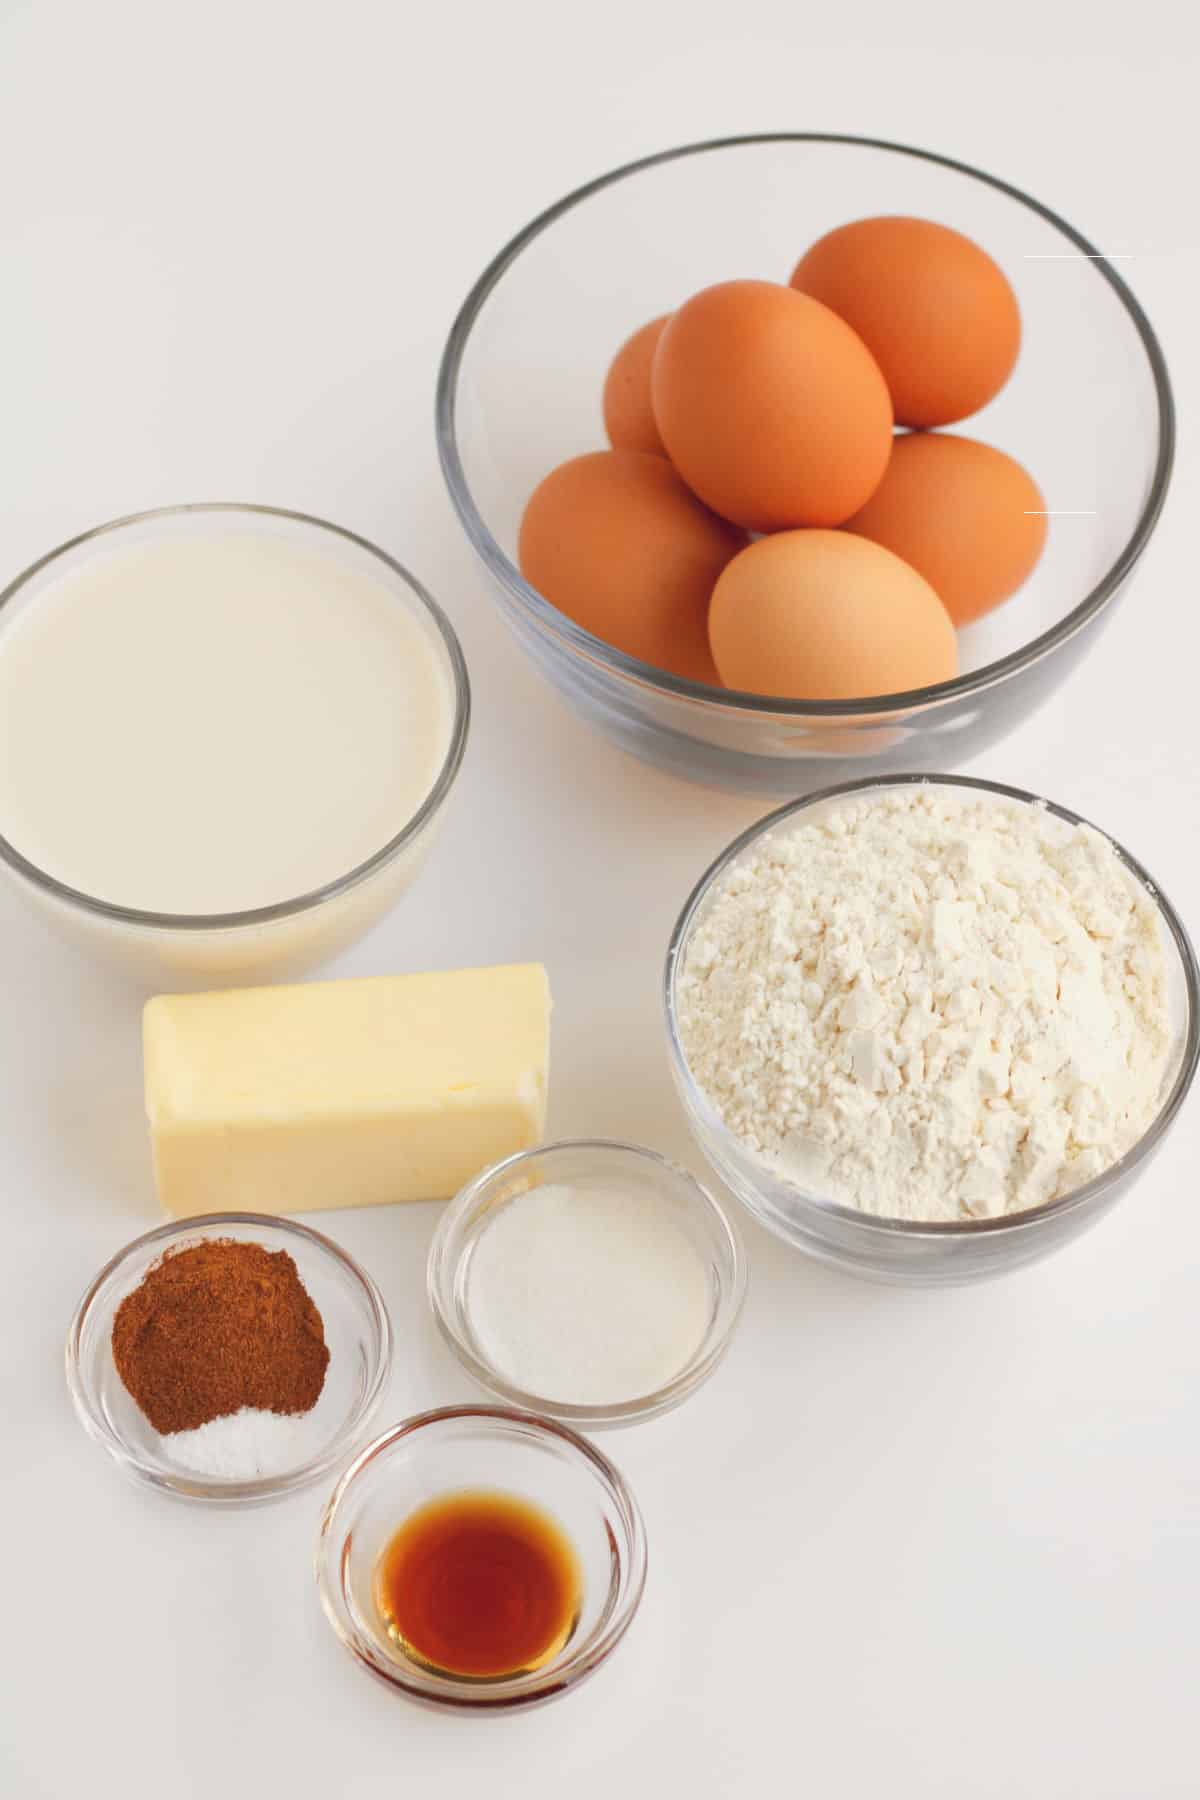 clear class bowls of eggs, milk, flour, cinnamon, vanilla, and a cube of butter